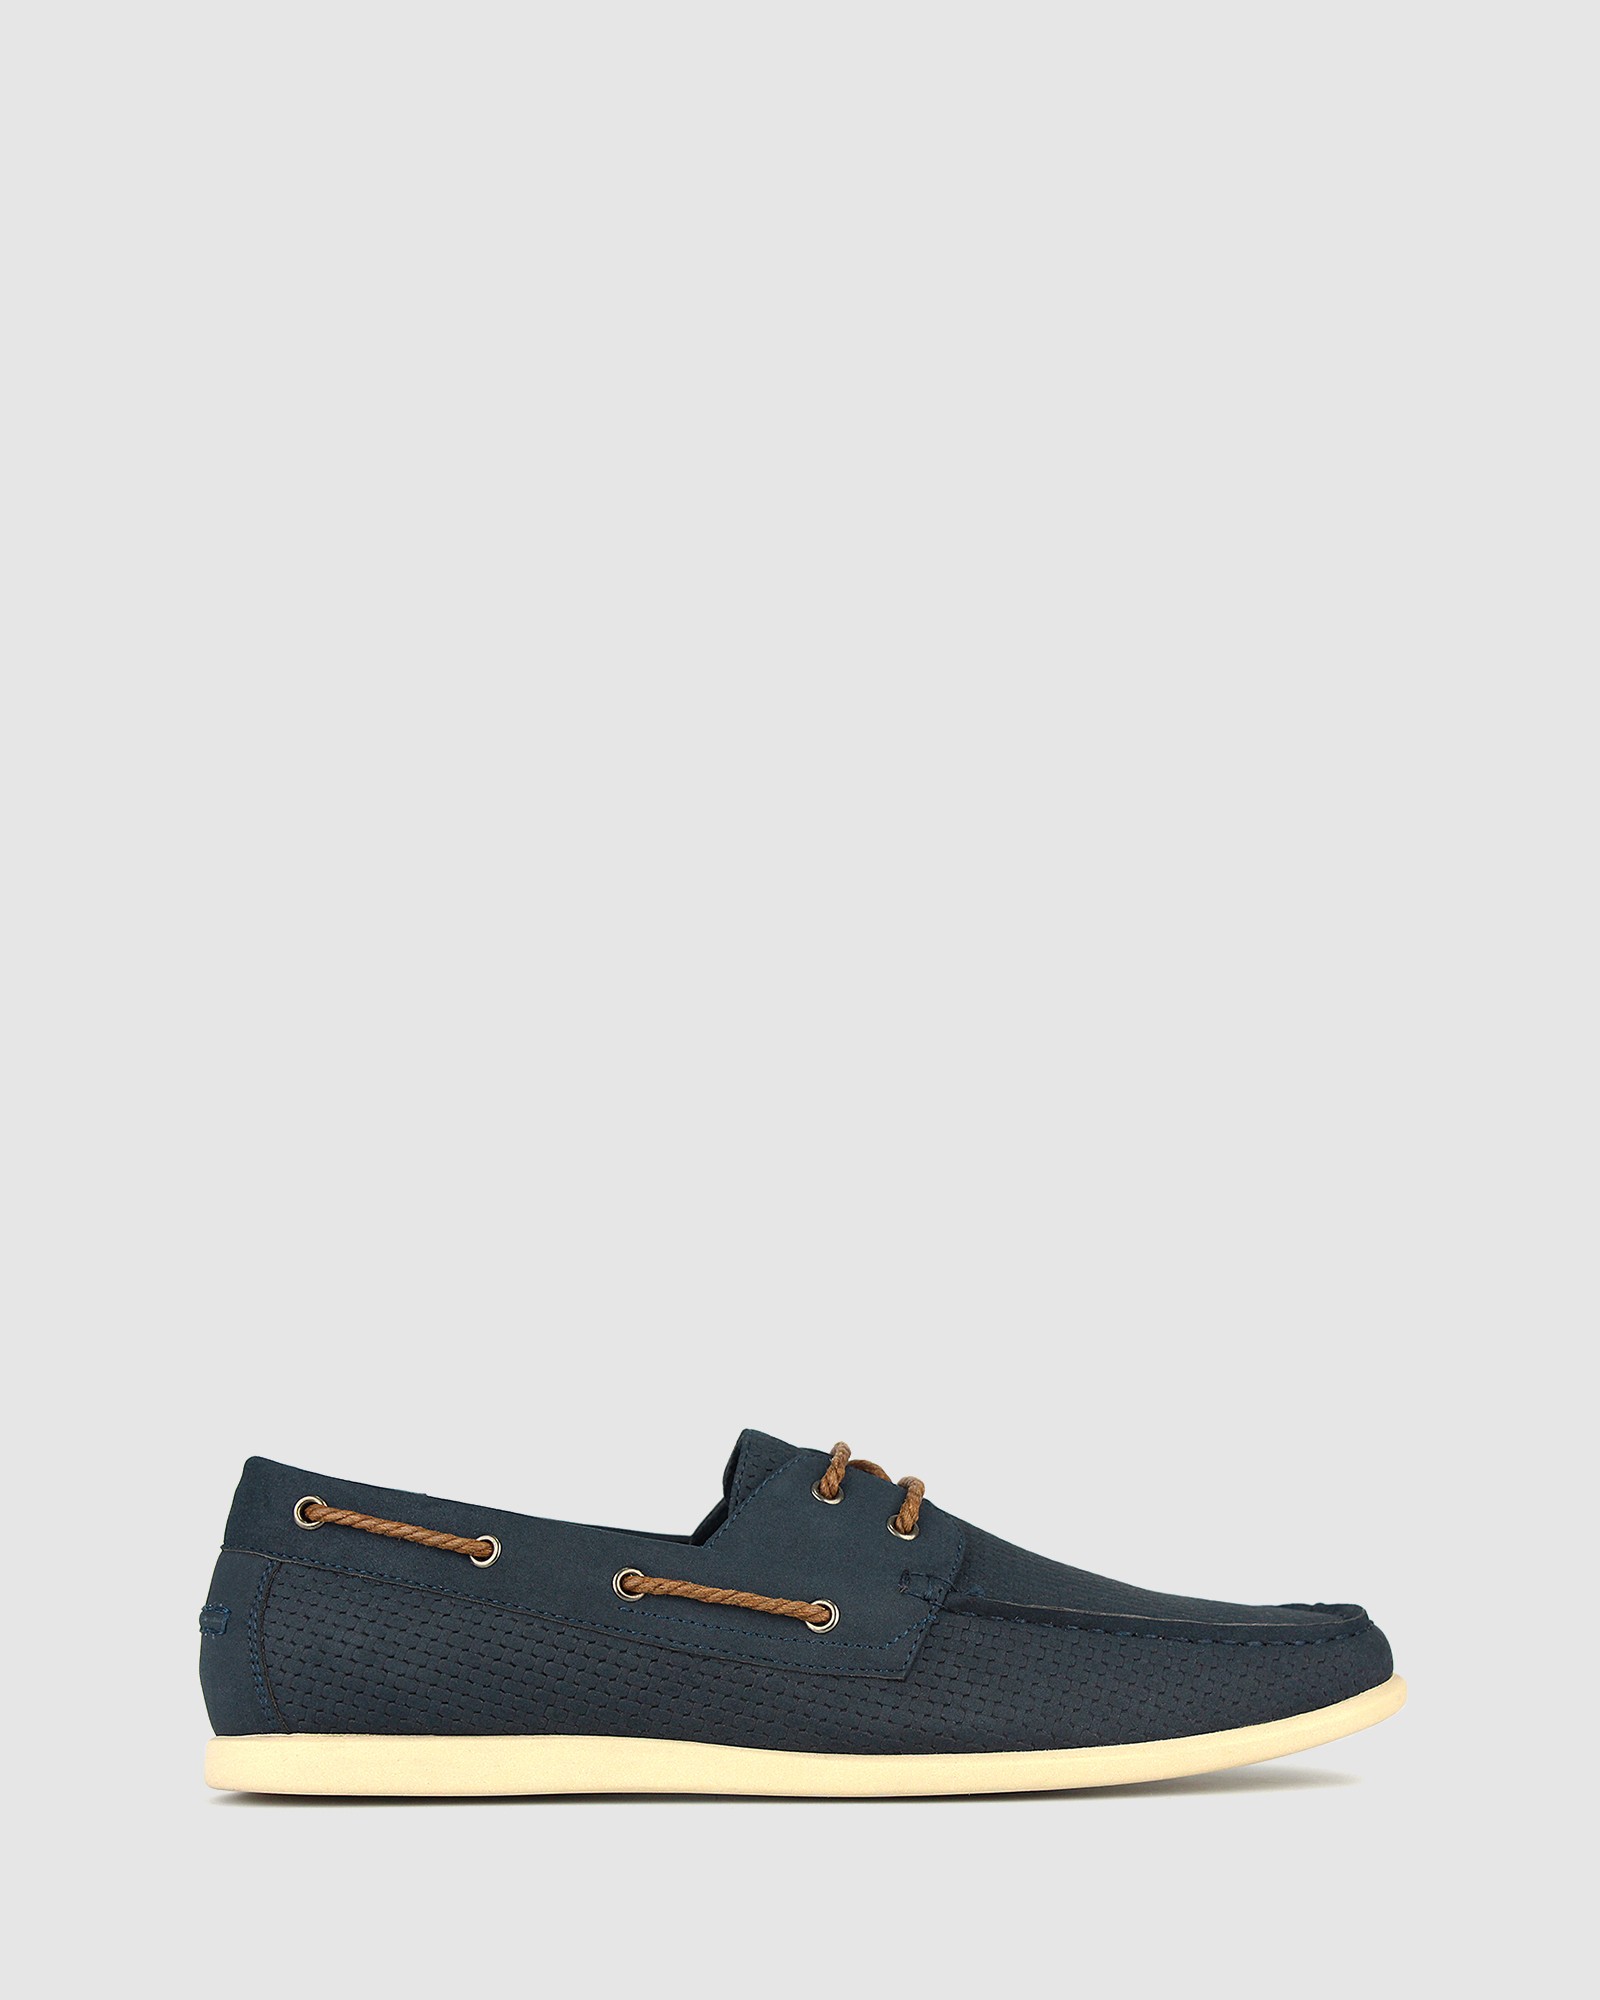 Jake Boat Shoes Navy by Betts | ShoeSales